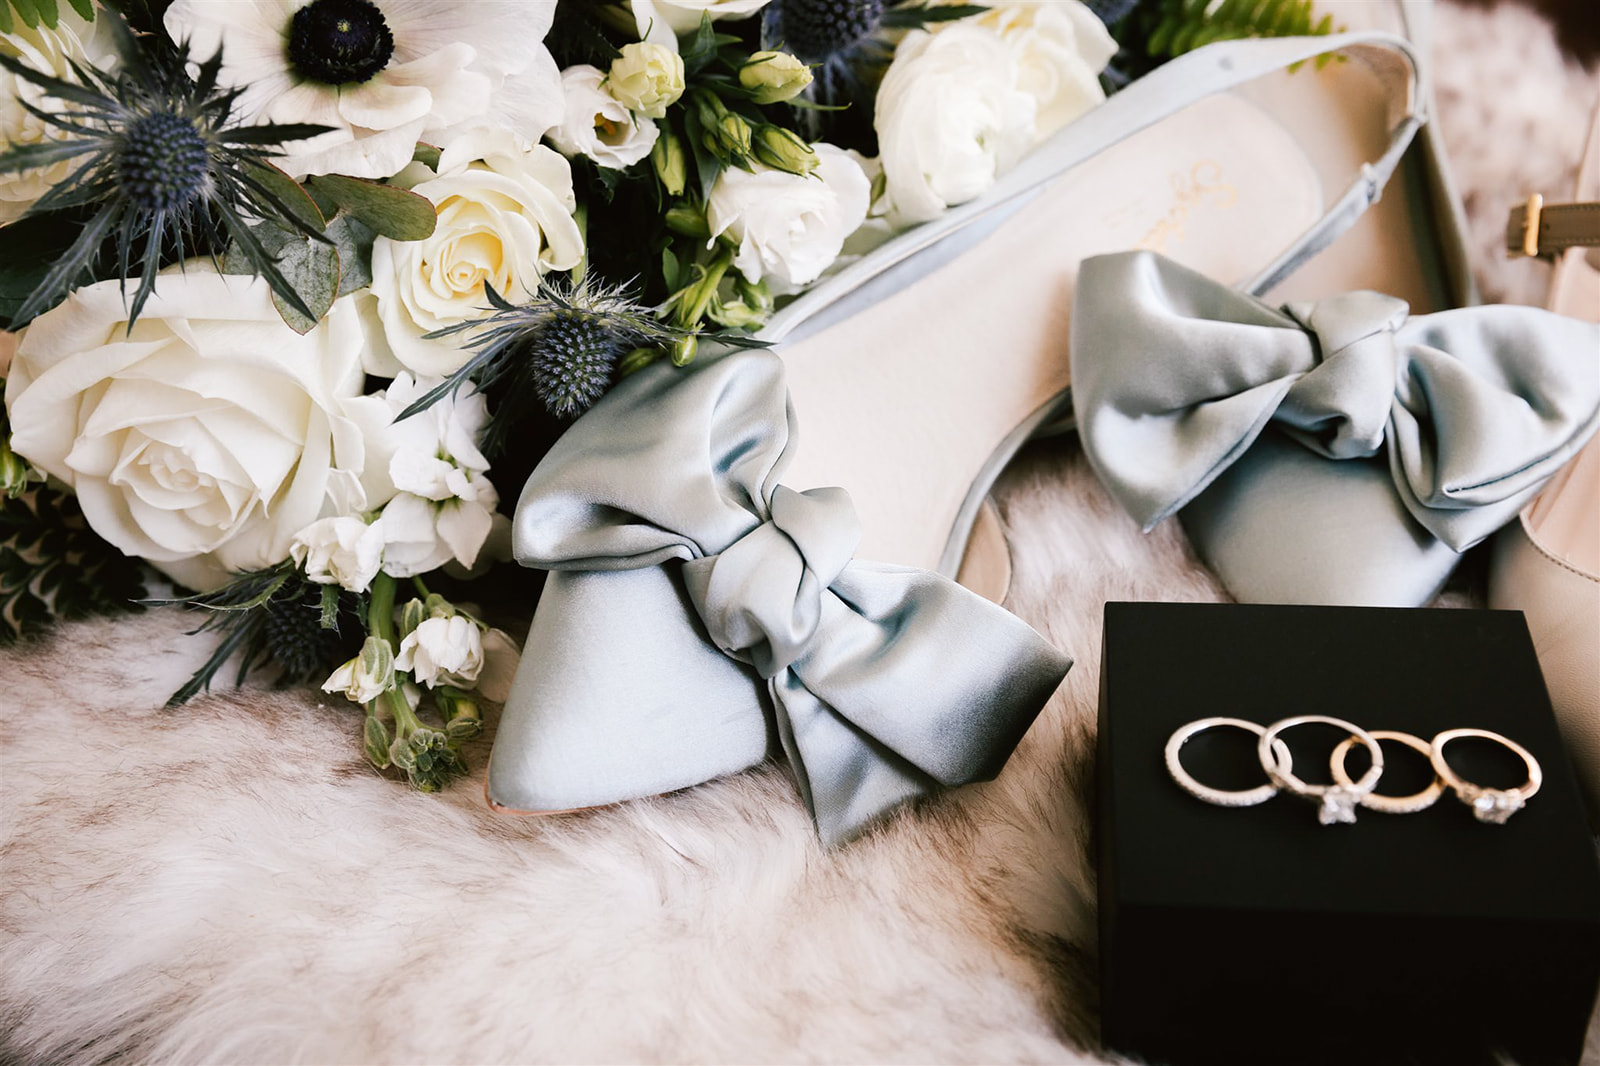 Bride's blue bow wedding shoes, a charming and sophisticated addition to her wedding day attire.